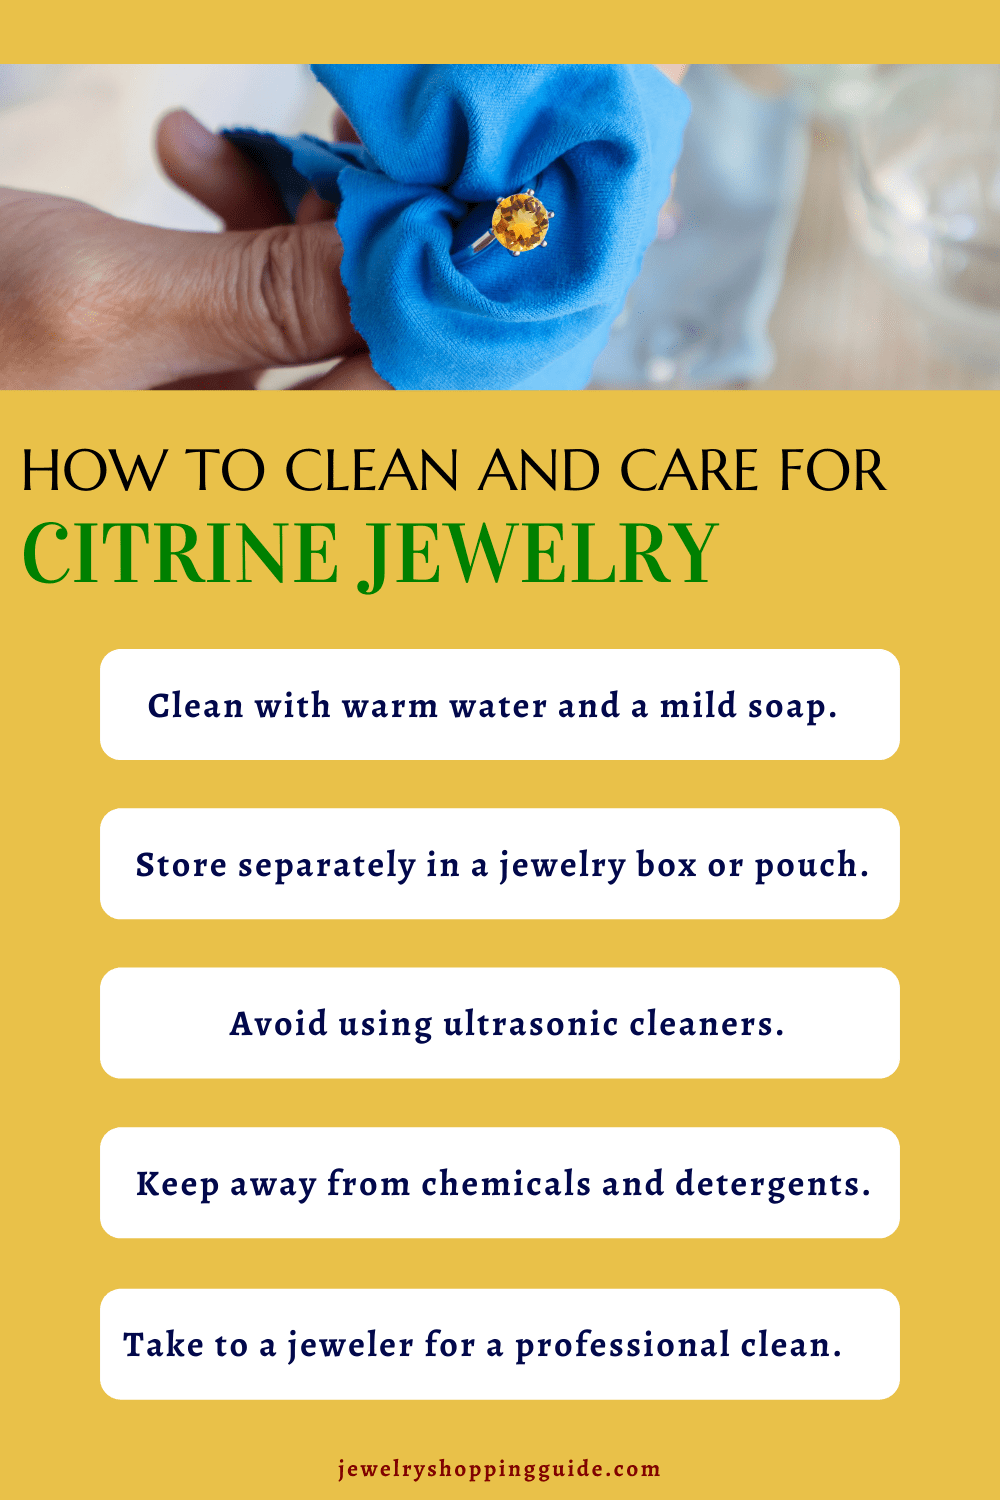 Cleaning and caring for citrine